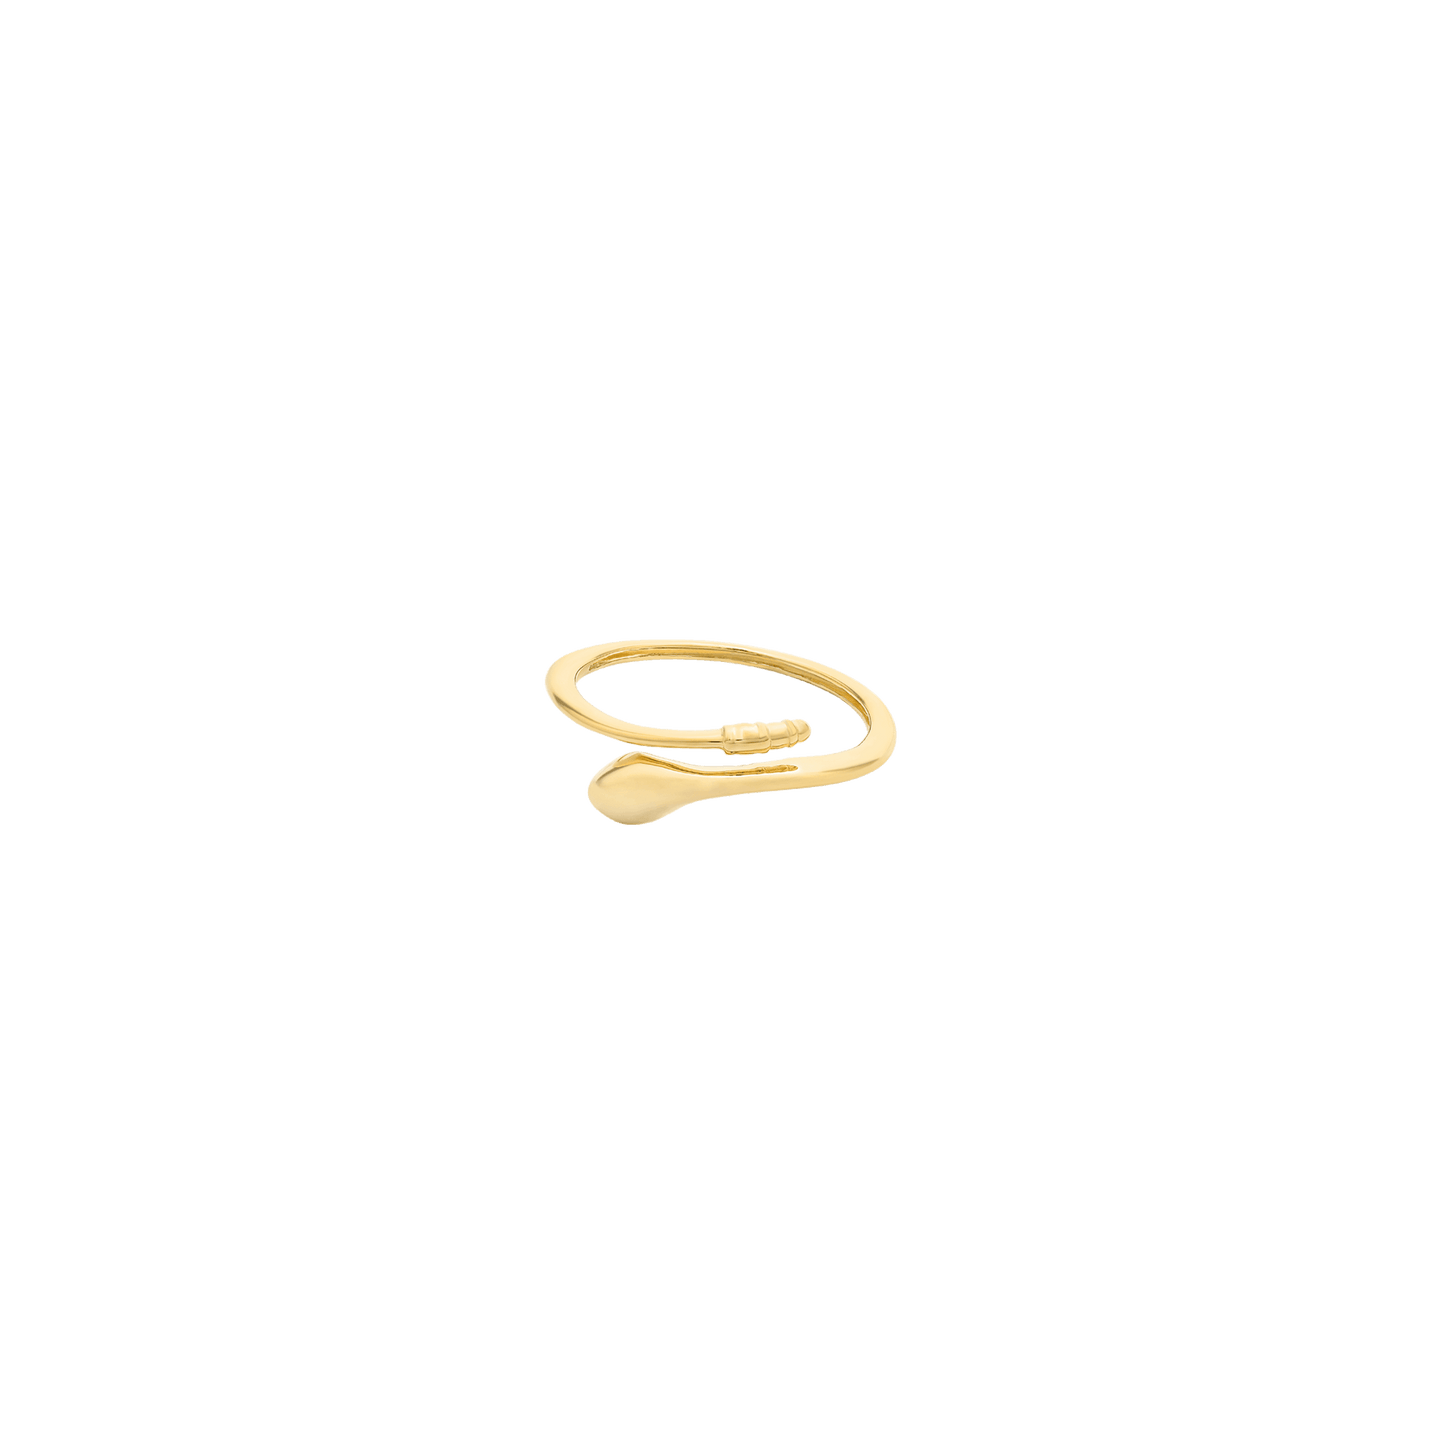 Snake Ring - 14K Yellow Gold Rings 14K Solid Gold US 4 